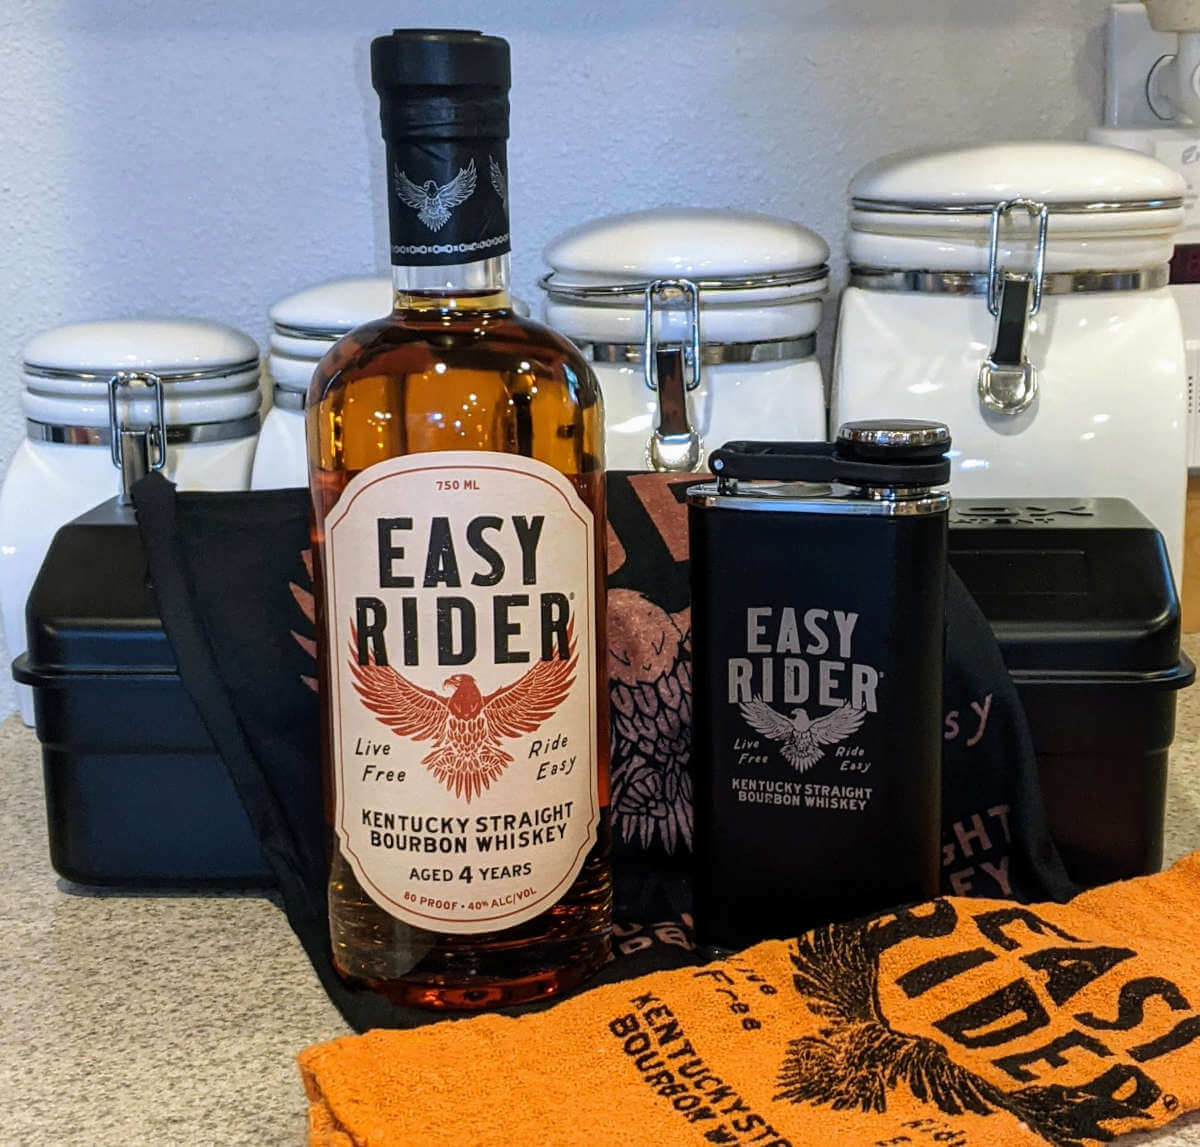 Received: Whiskey! Easy Rider Kentucky Straight Bourbon Whiskey from Hood River Distillers